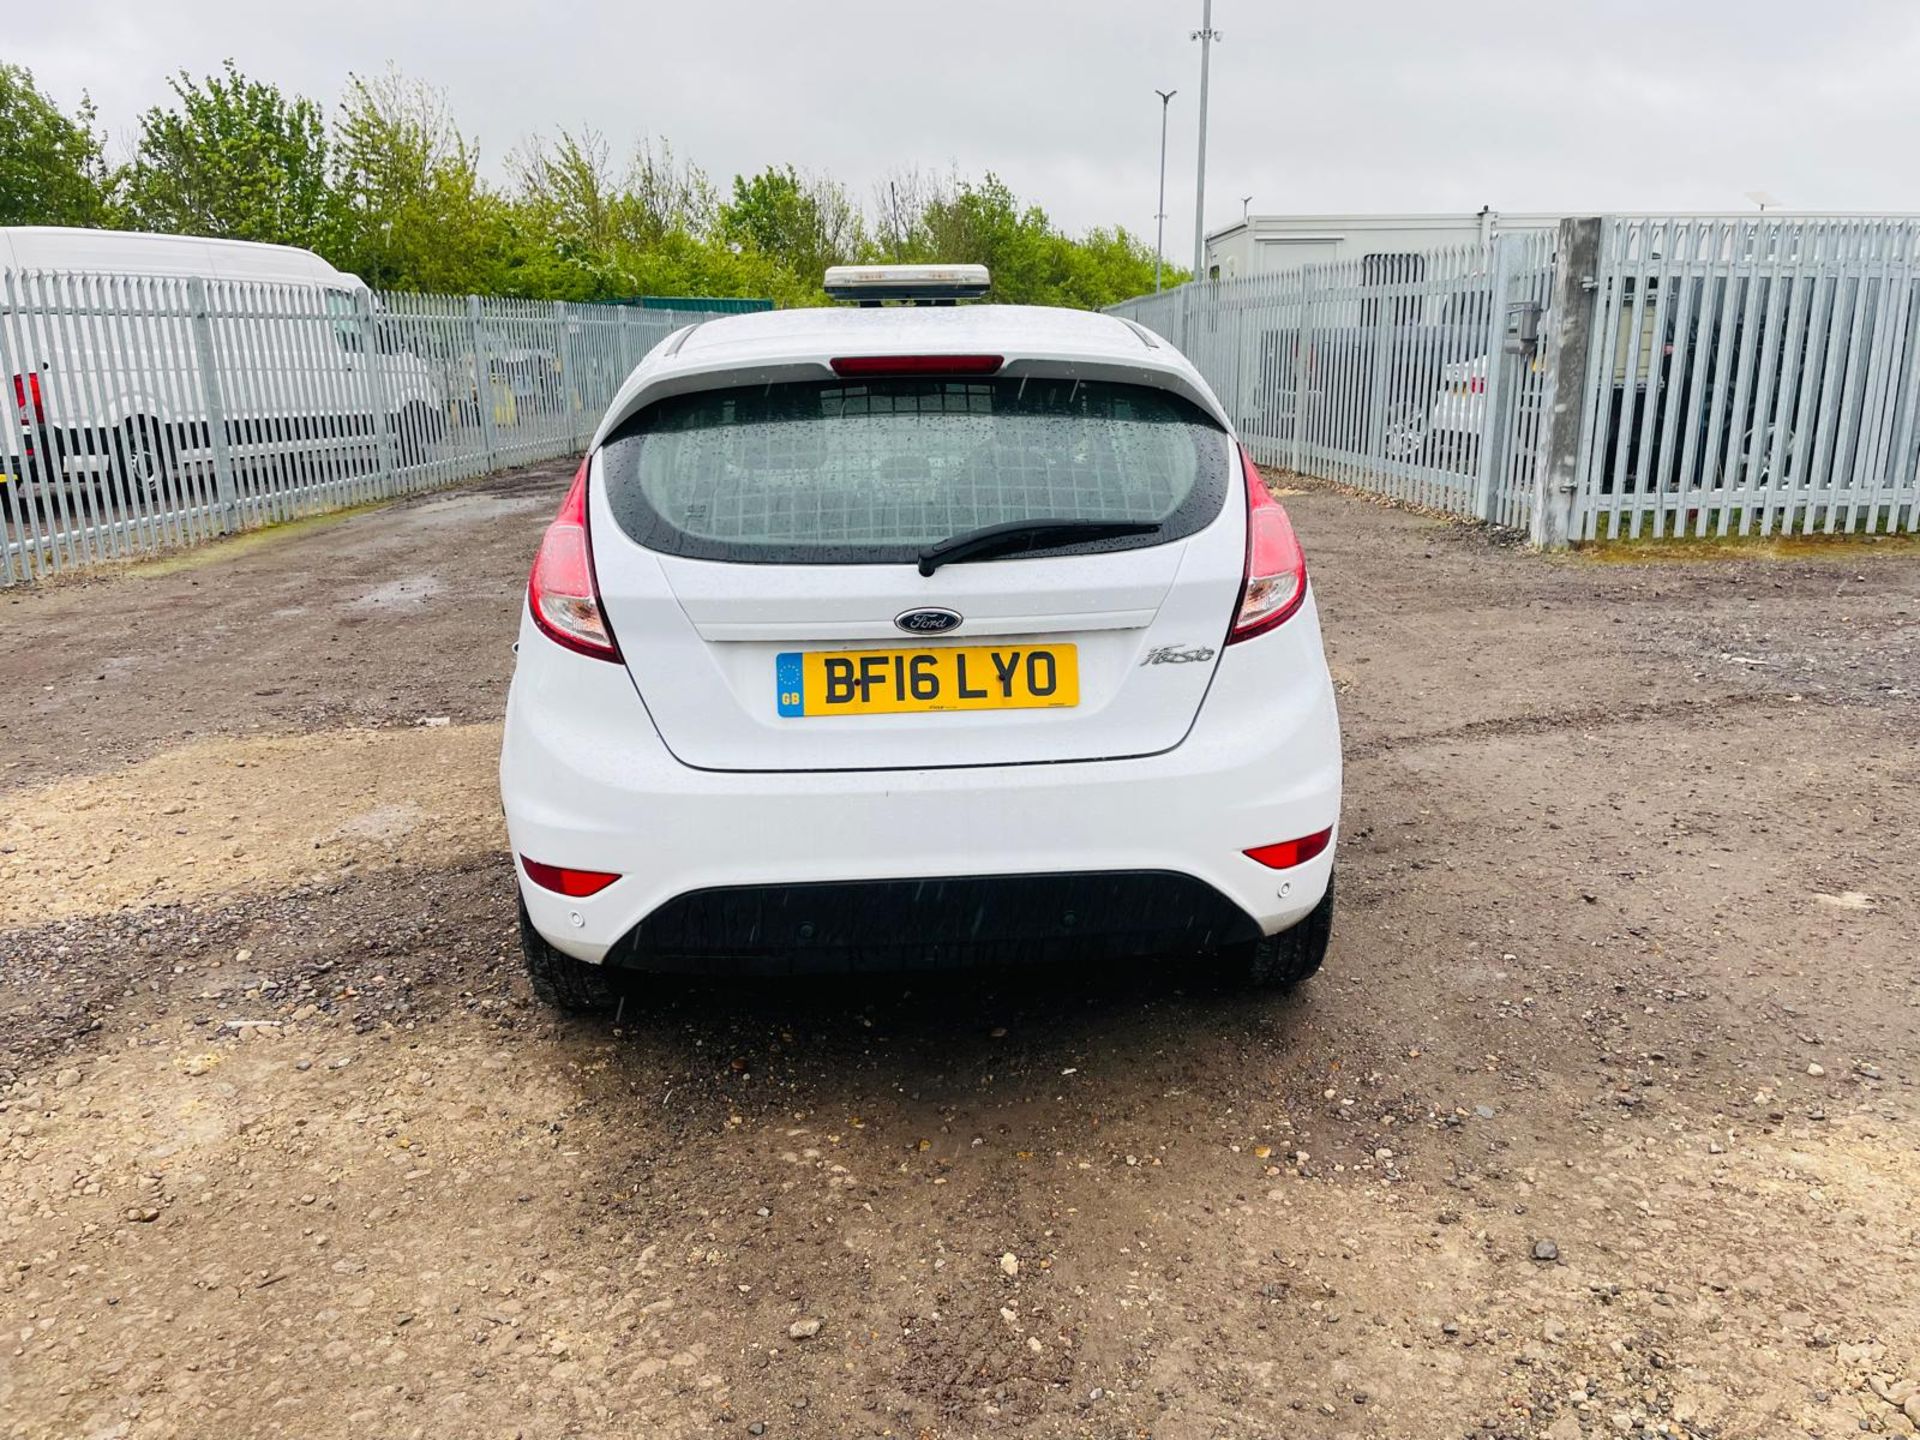 ** ON SALE ** Ford Fiesta 1.5 TDCI EcoNetic 2016 '16 Reg' Very Economical - Parking Sensors - Image 6 of 25